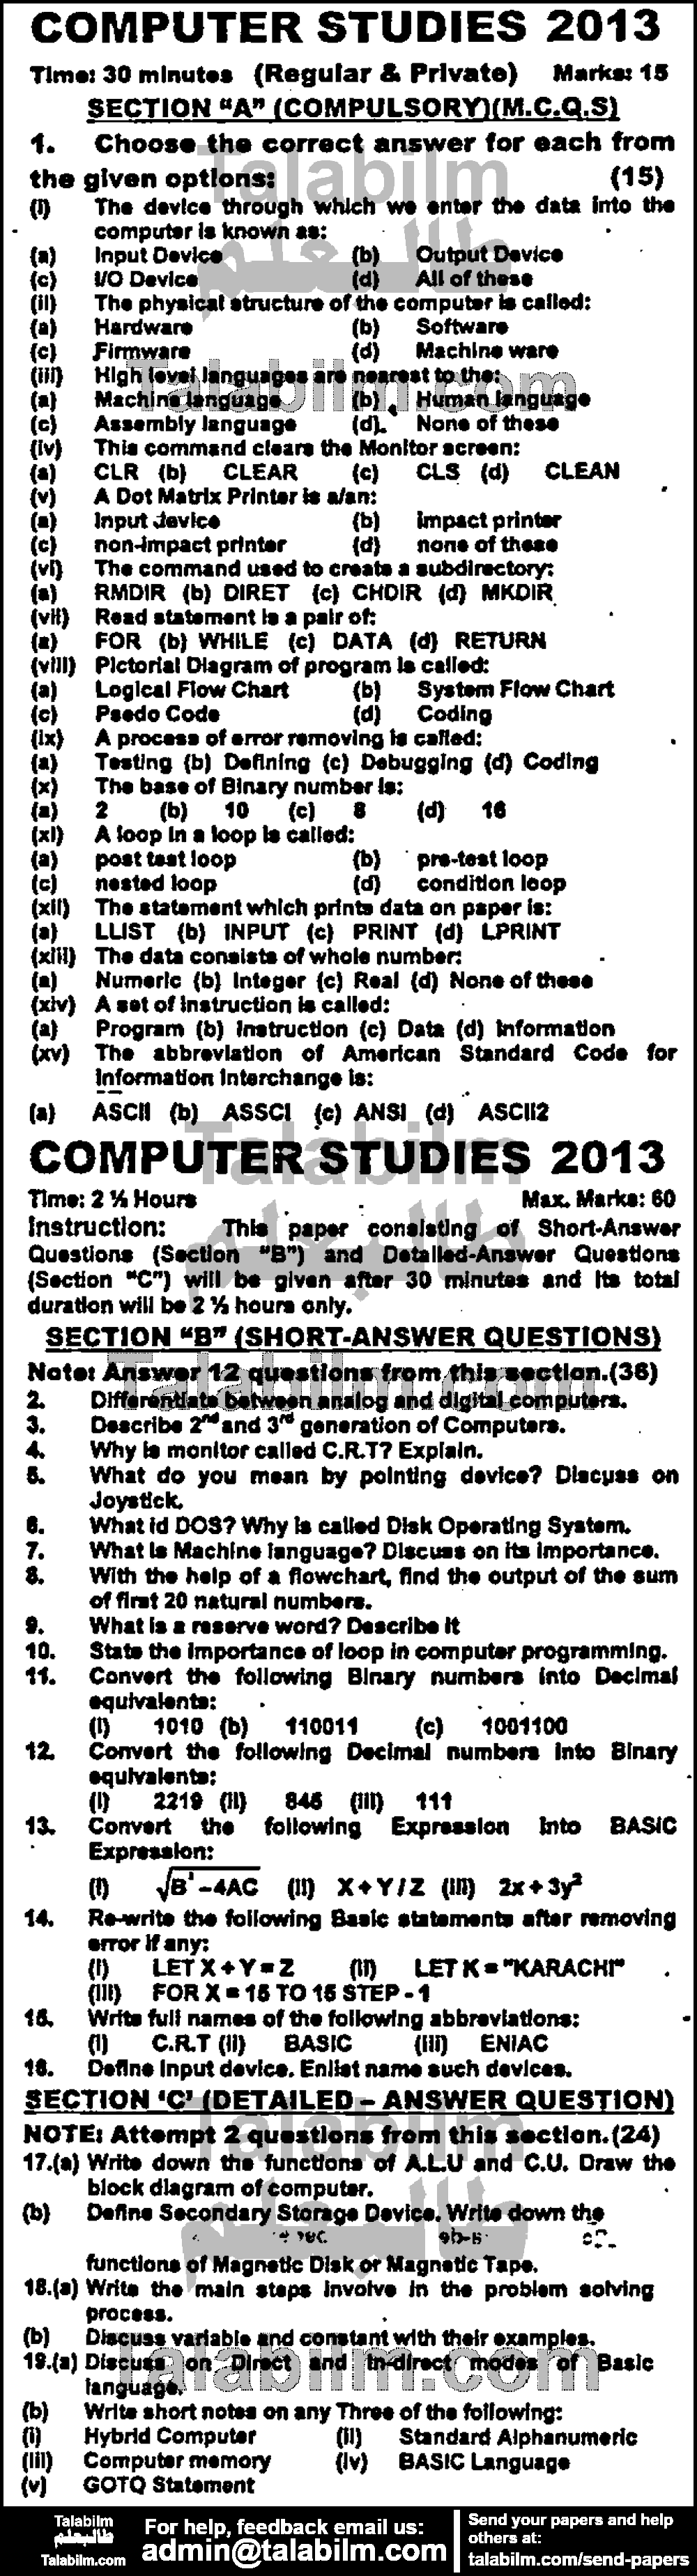 Computer Science 0 past paper for English Medium 2013 Group-I